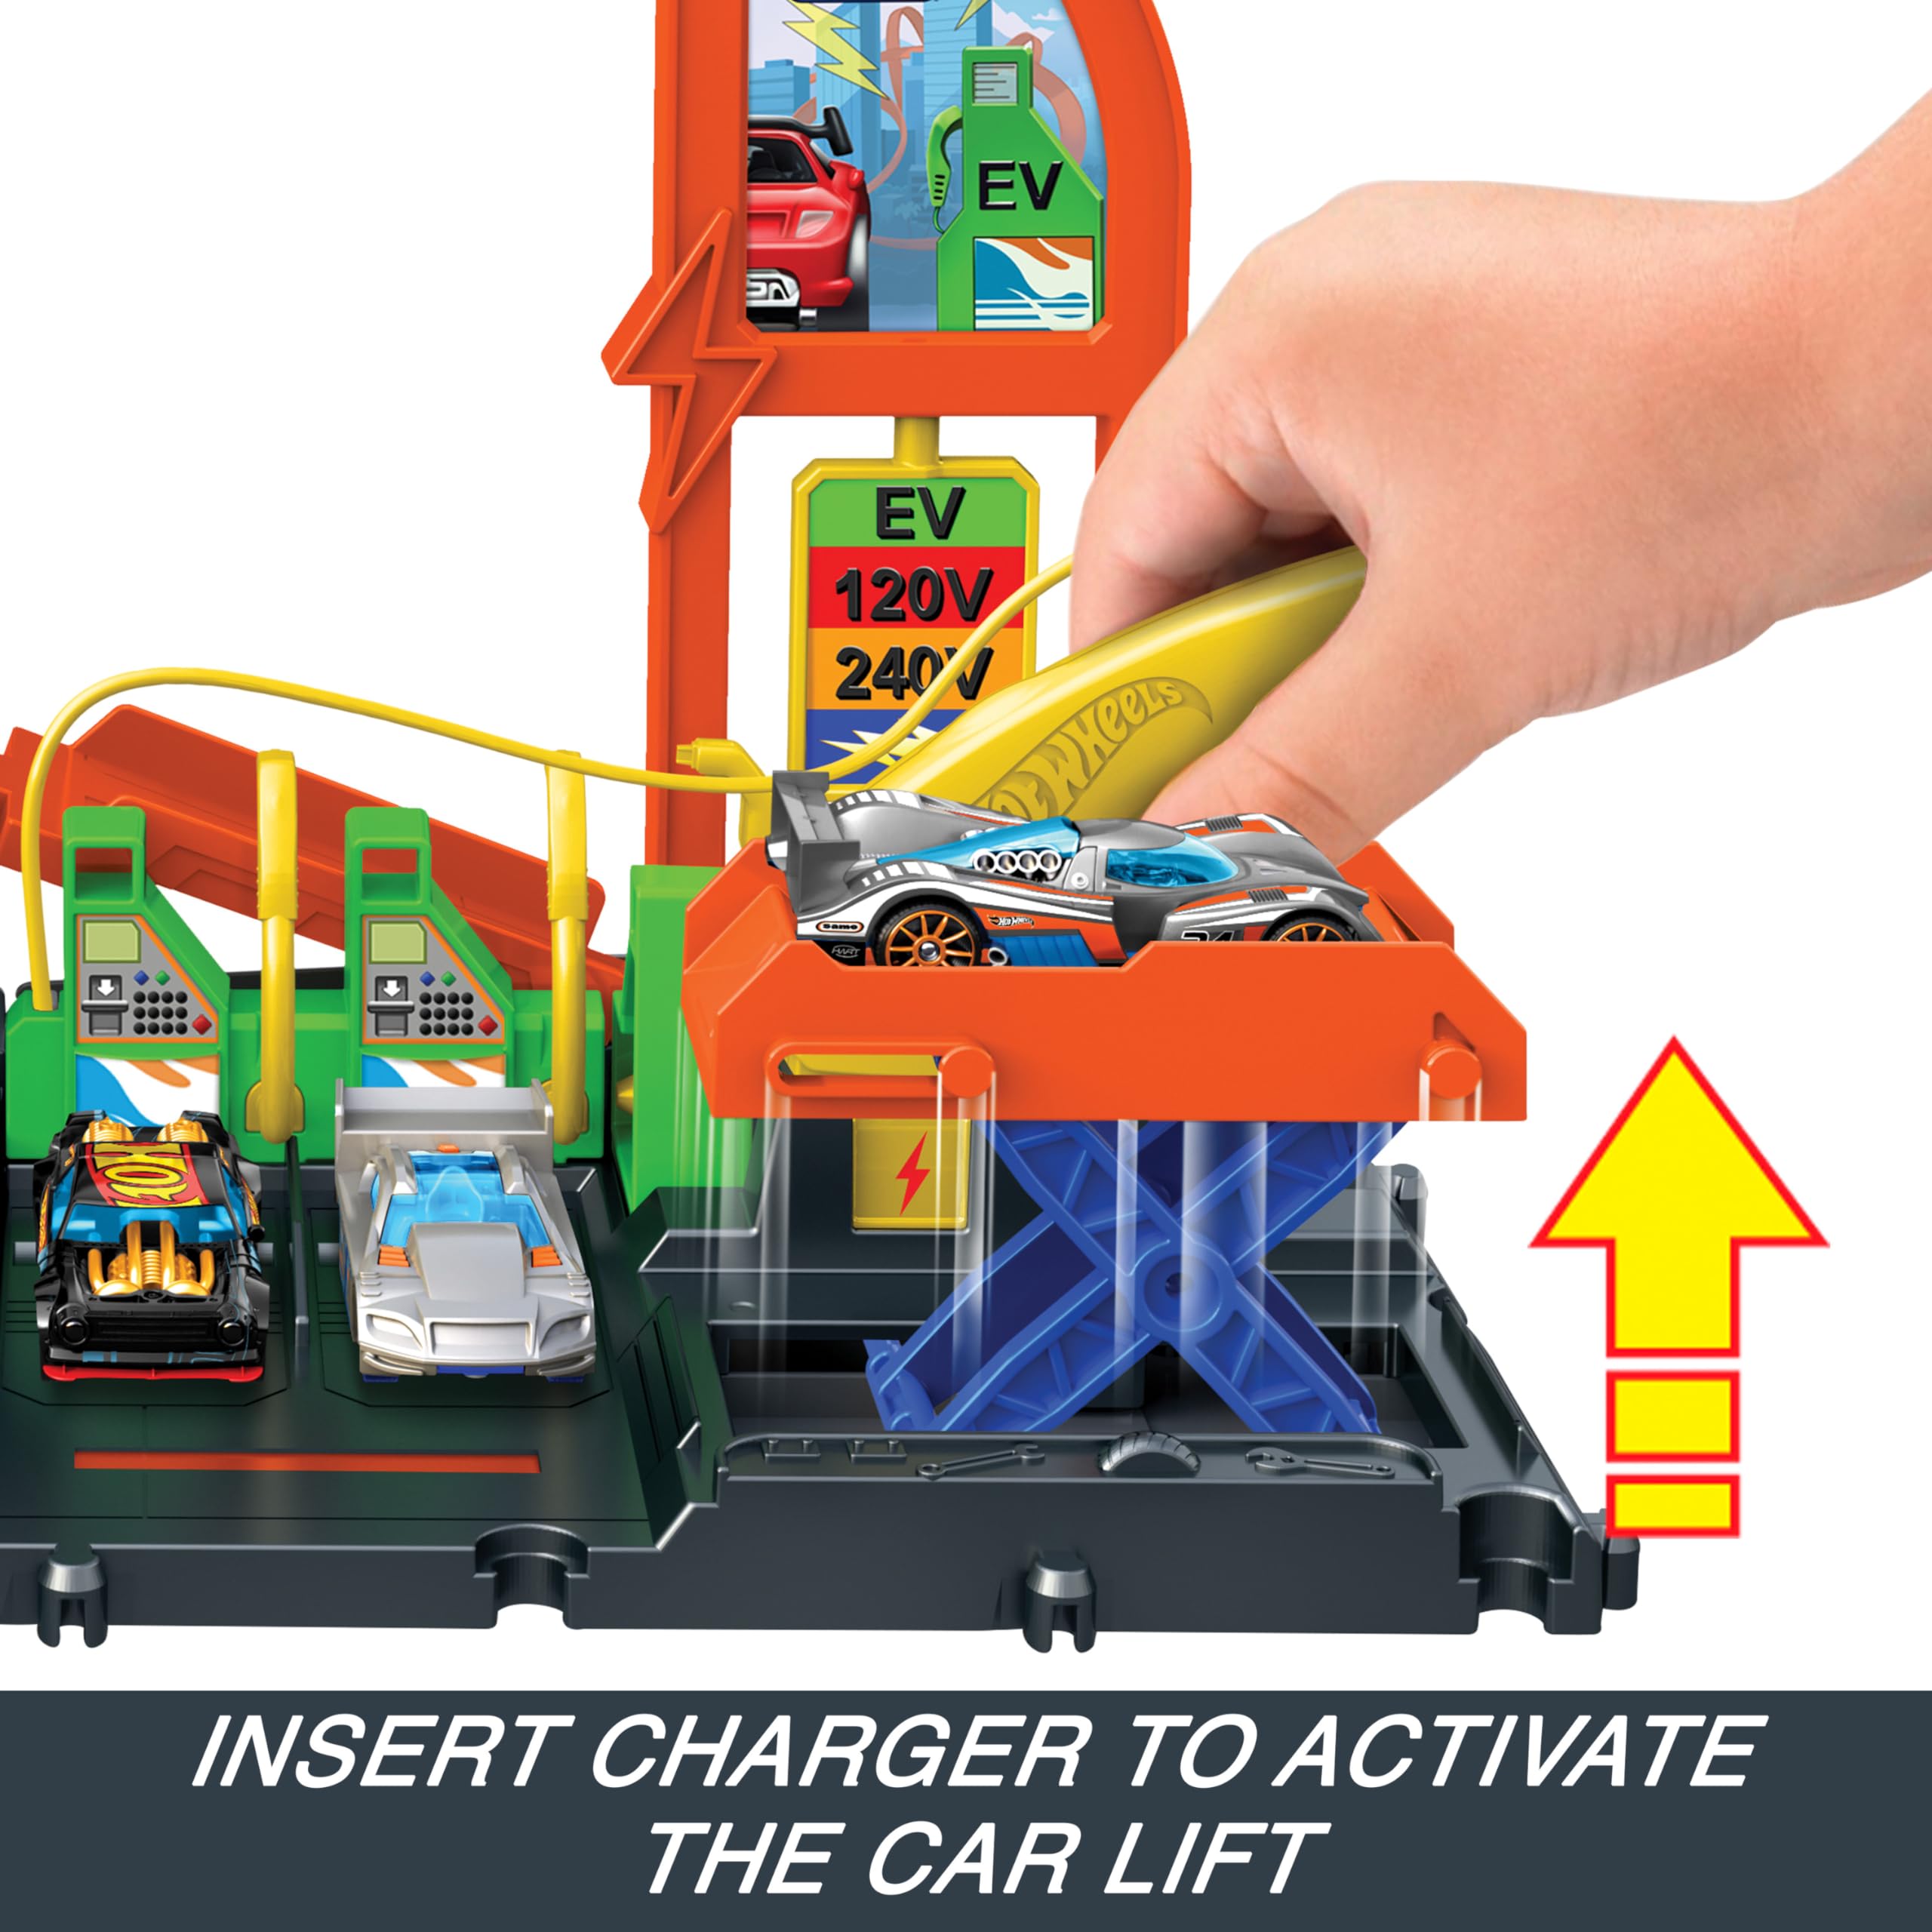 Hot Wheels Toy Car Track Set, Super Recharge Fuel Station Playset with Pretend EV Chargers & 1:64 Scale Toy Car